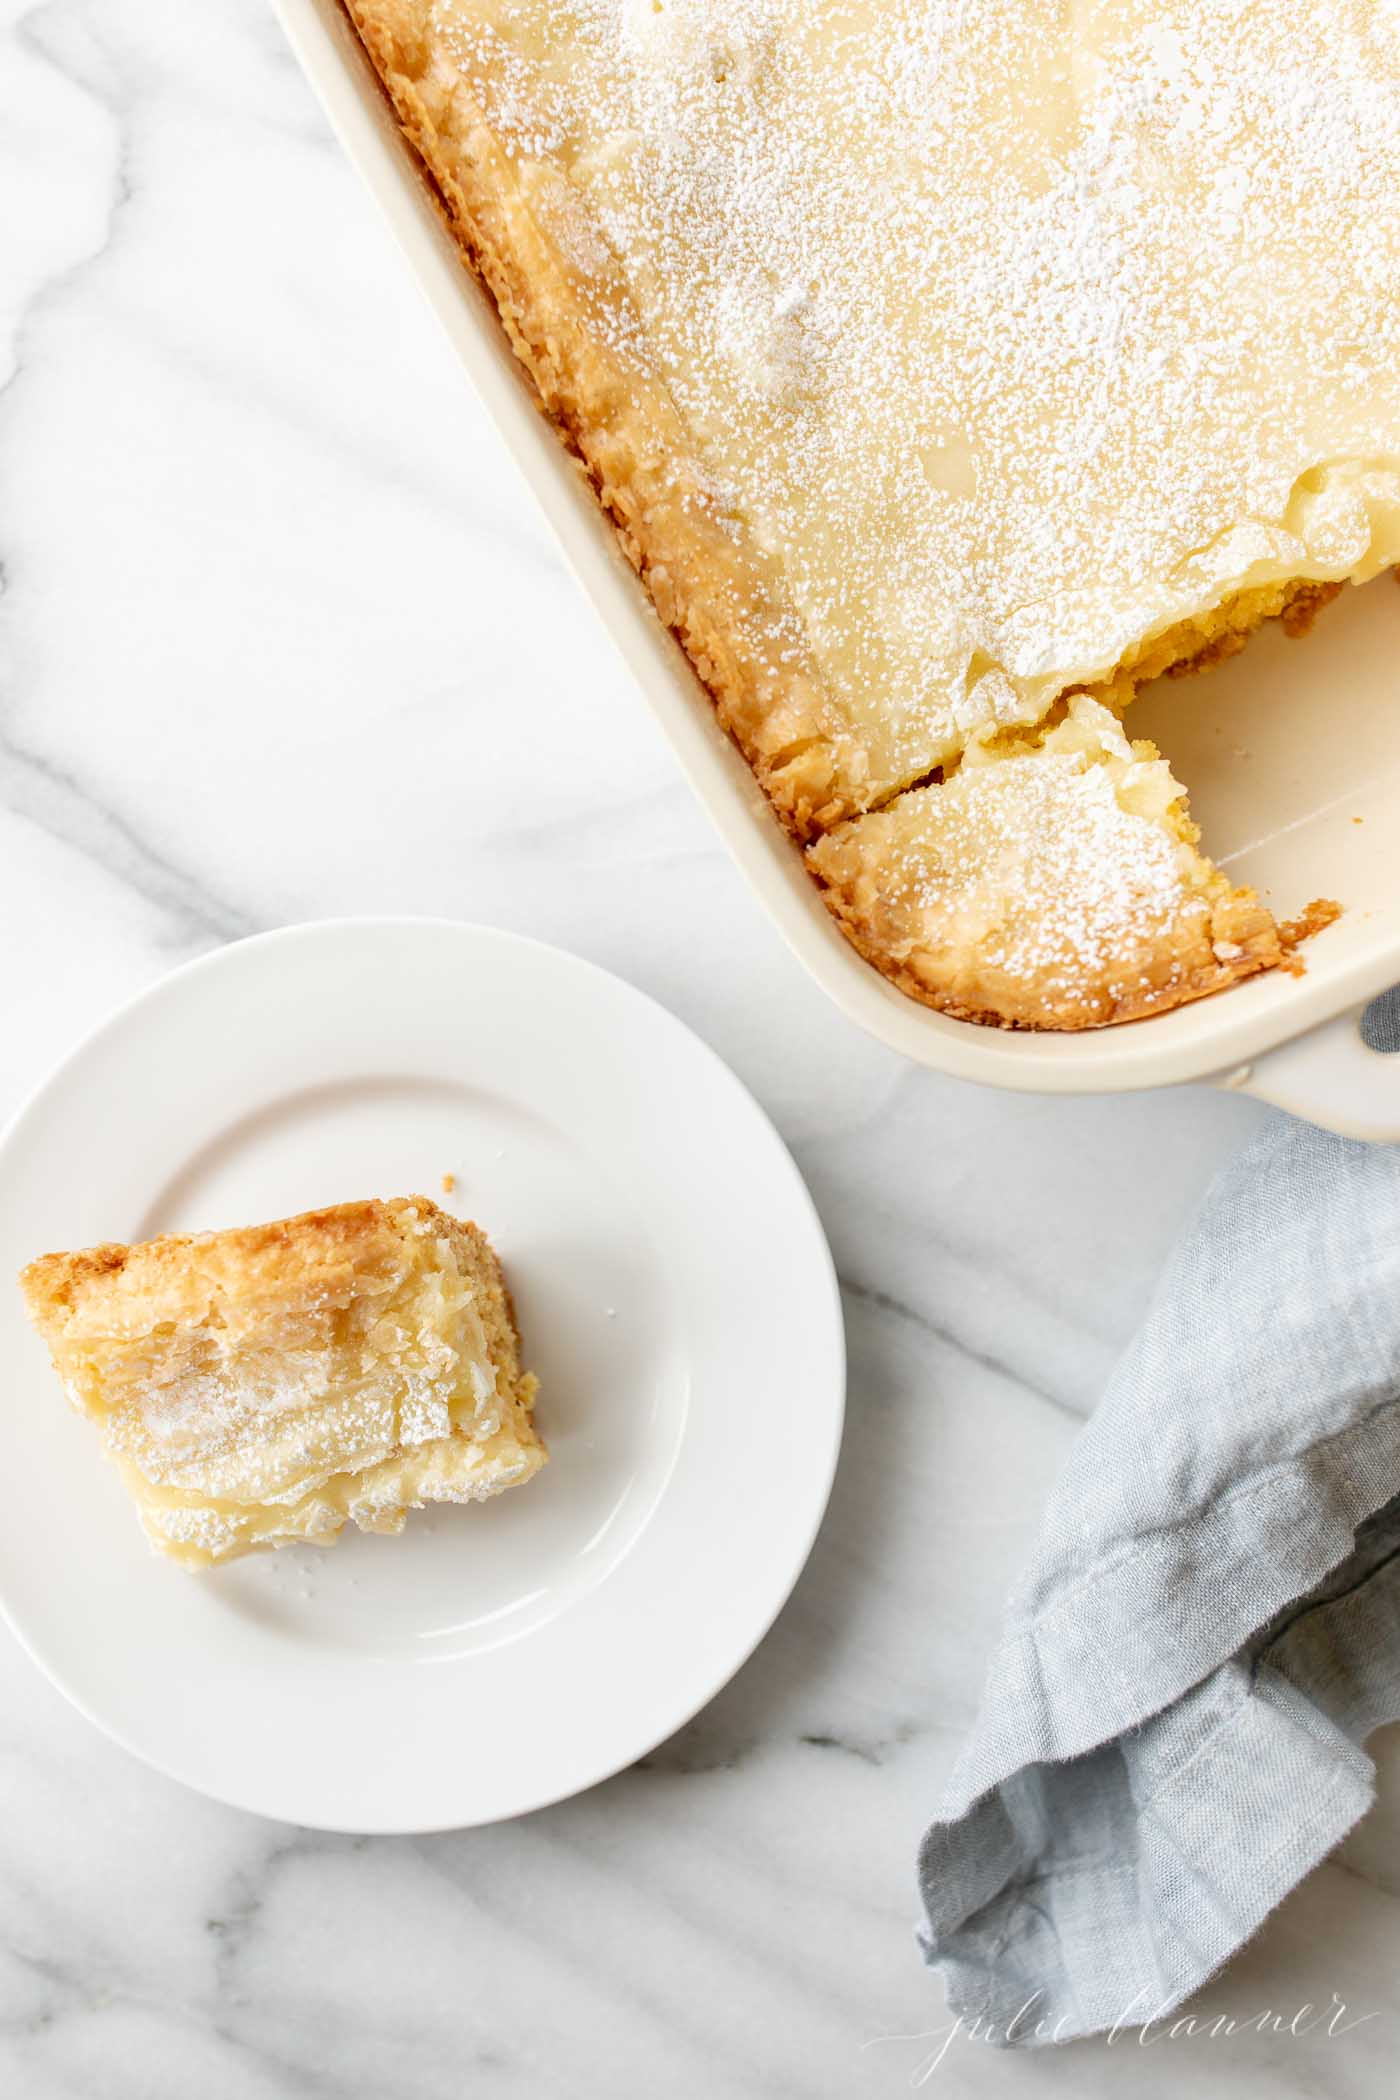 A white rectangular baking dish filled with a homemade gooey butter cake. White plate with a serving to the side.